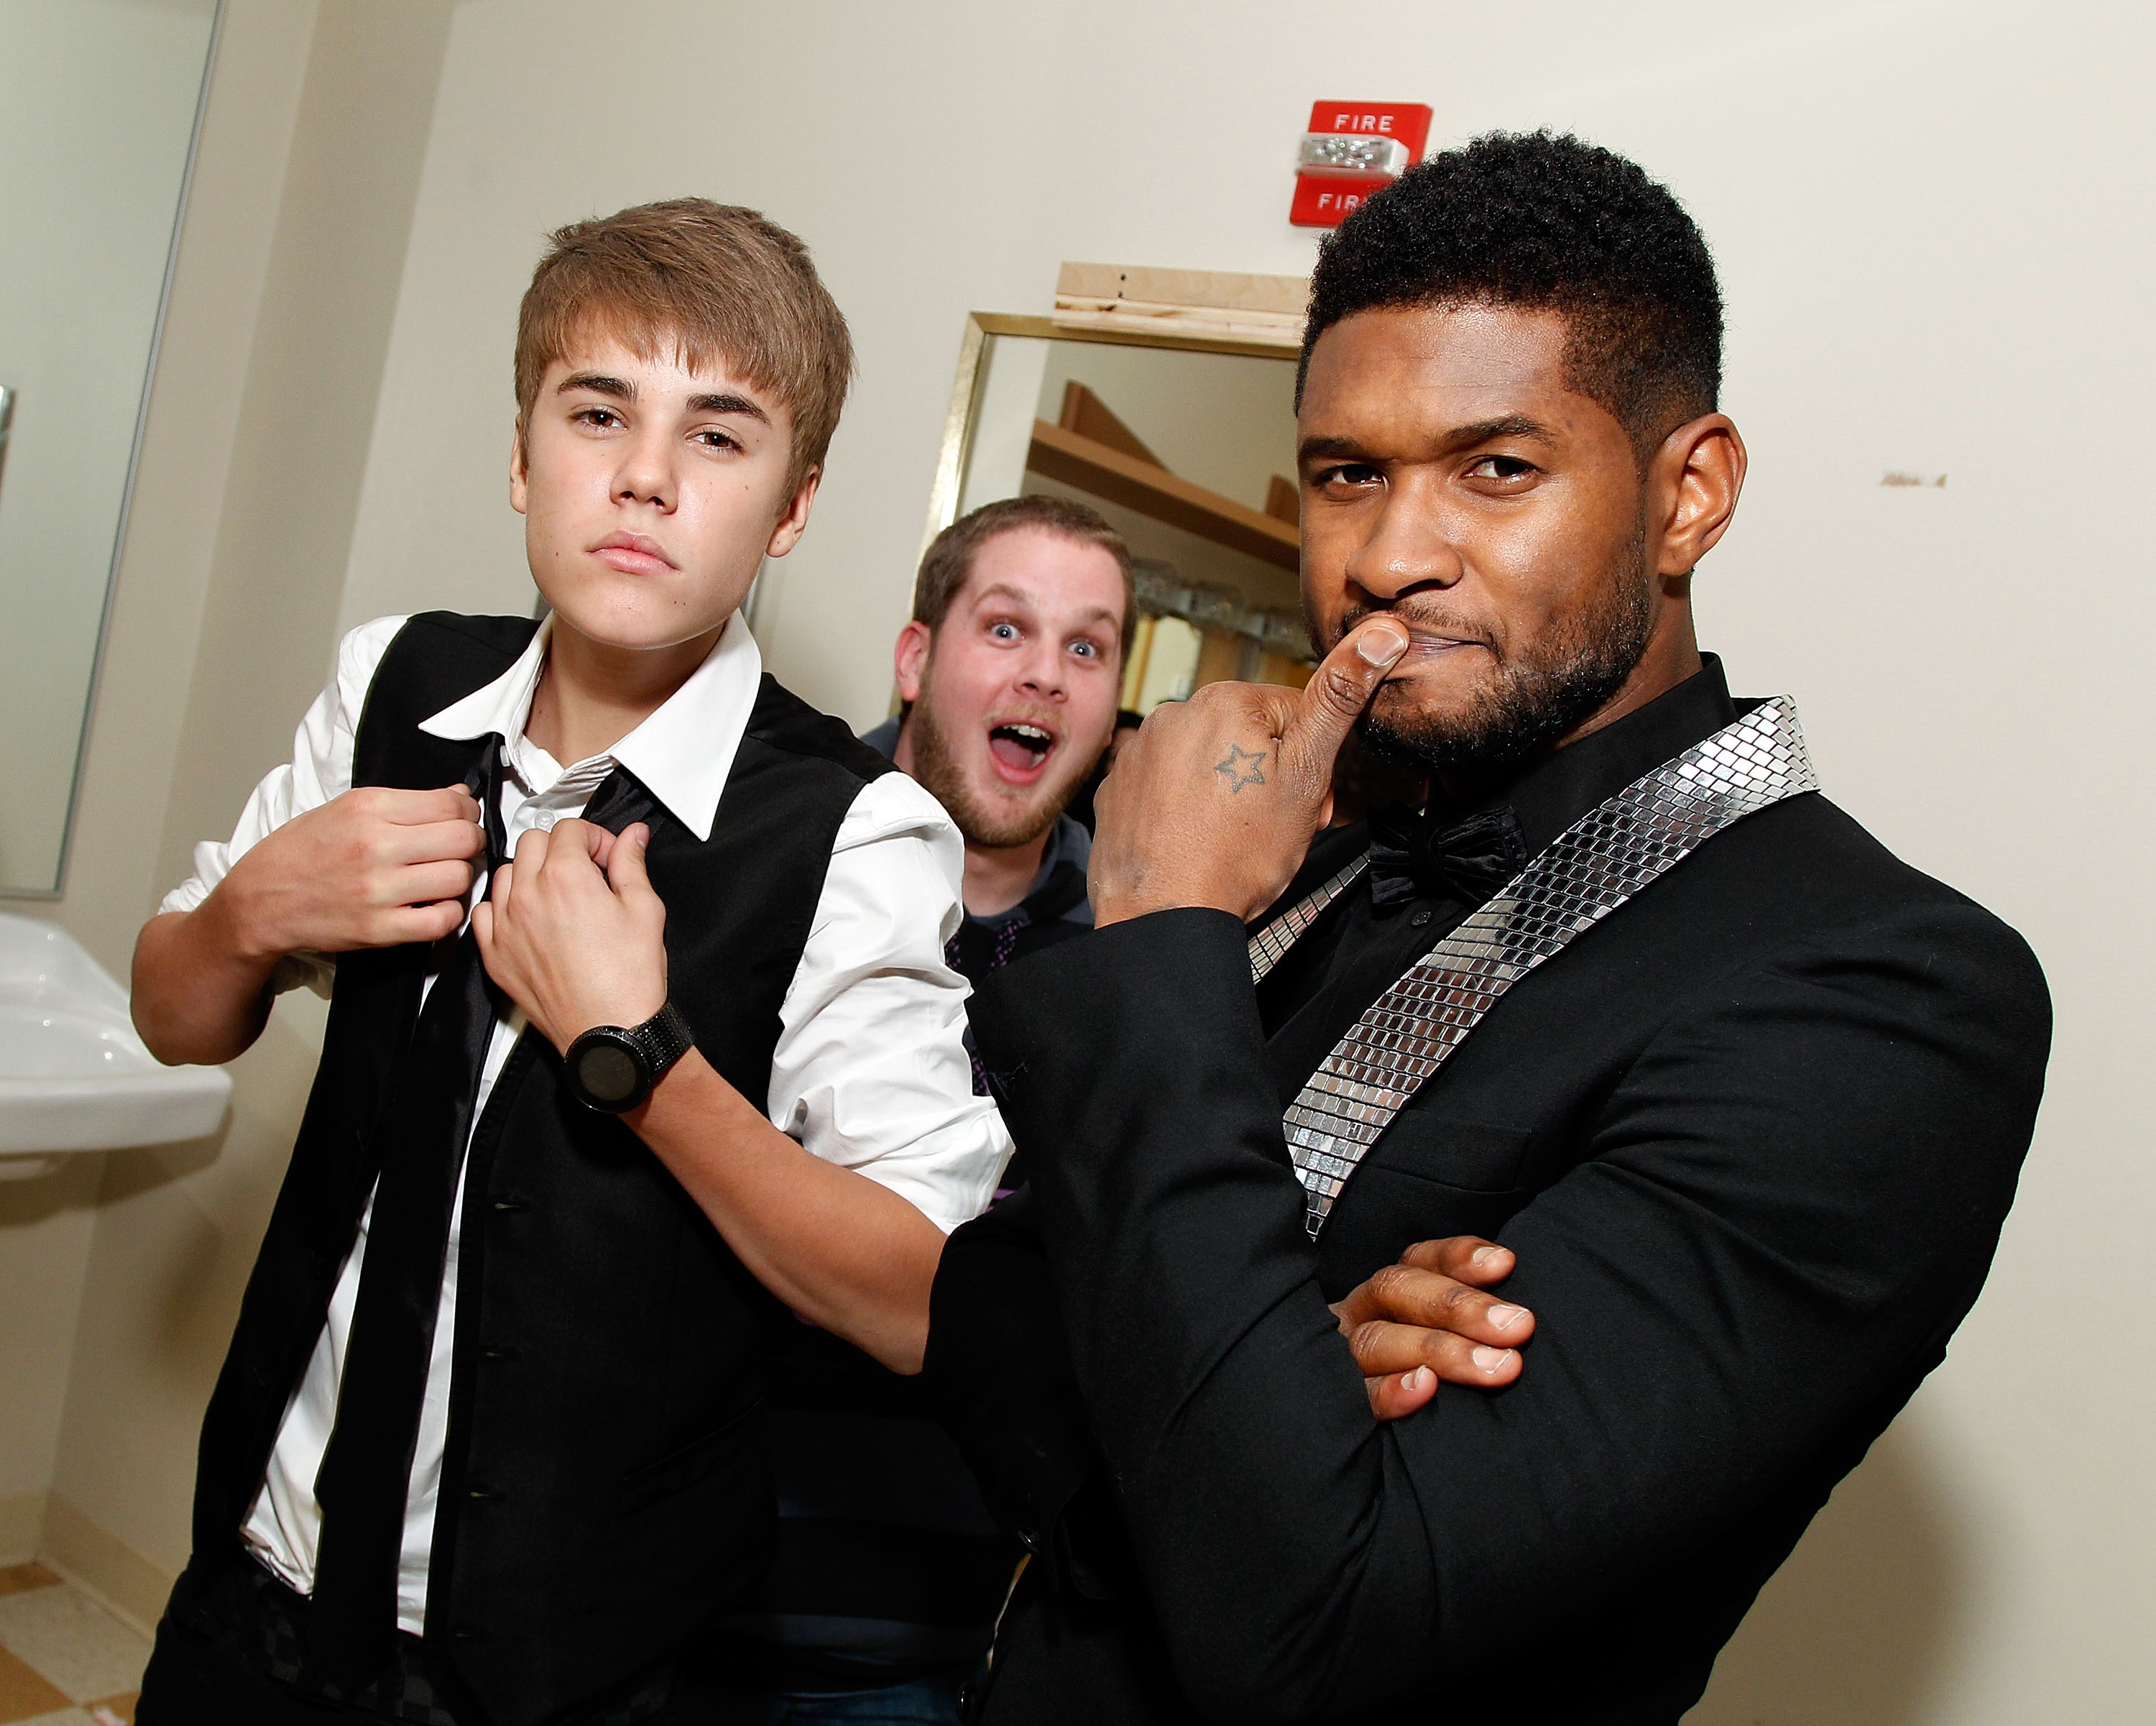 Usher will be joined by Justin Bieber during his half time Super Bowl show